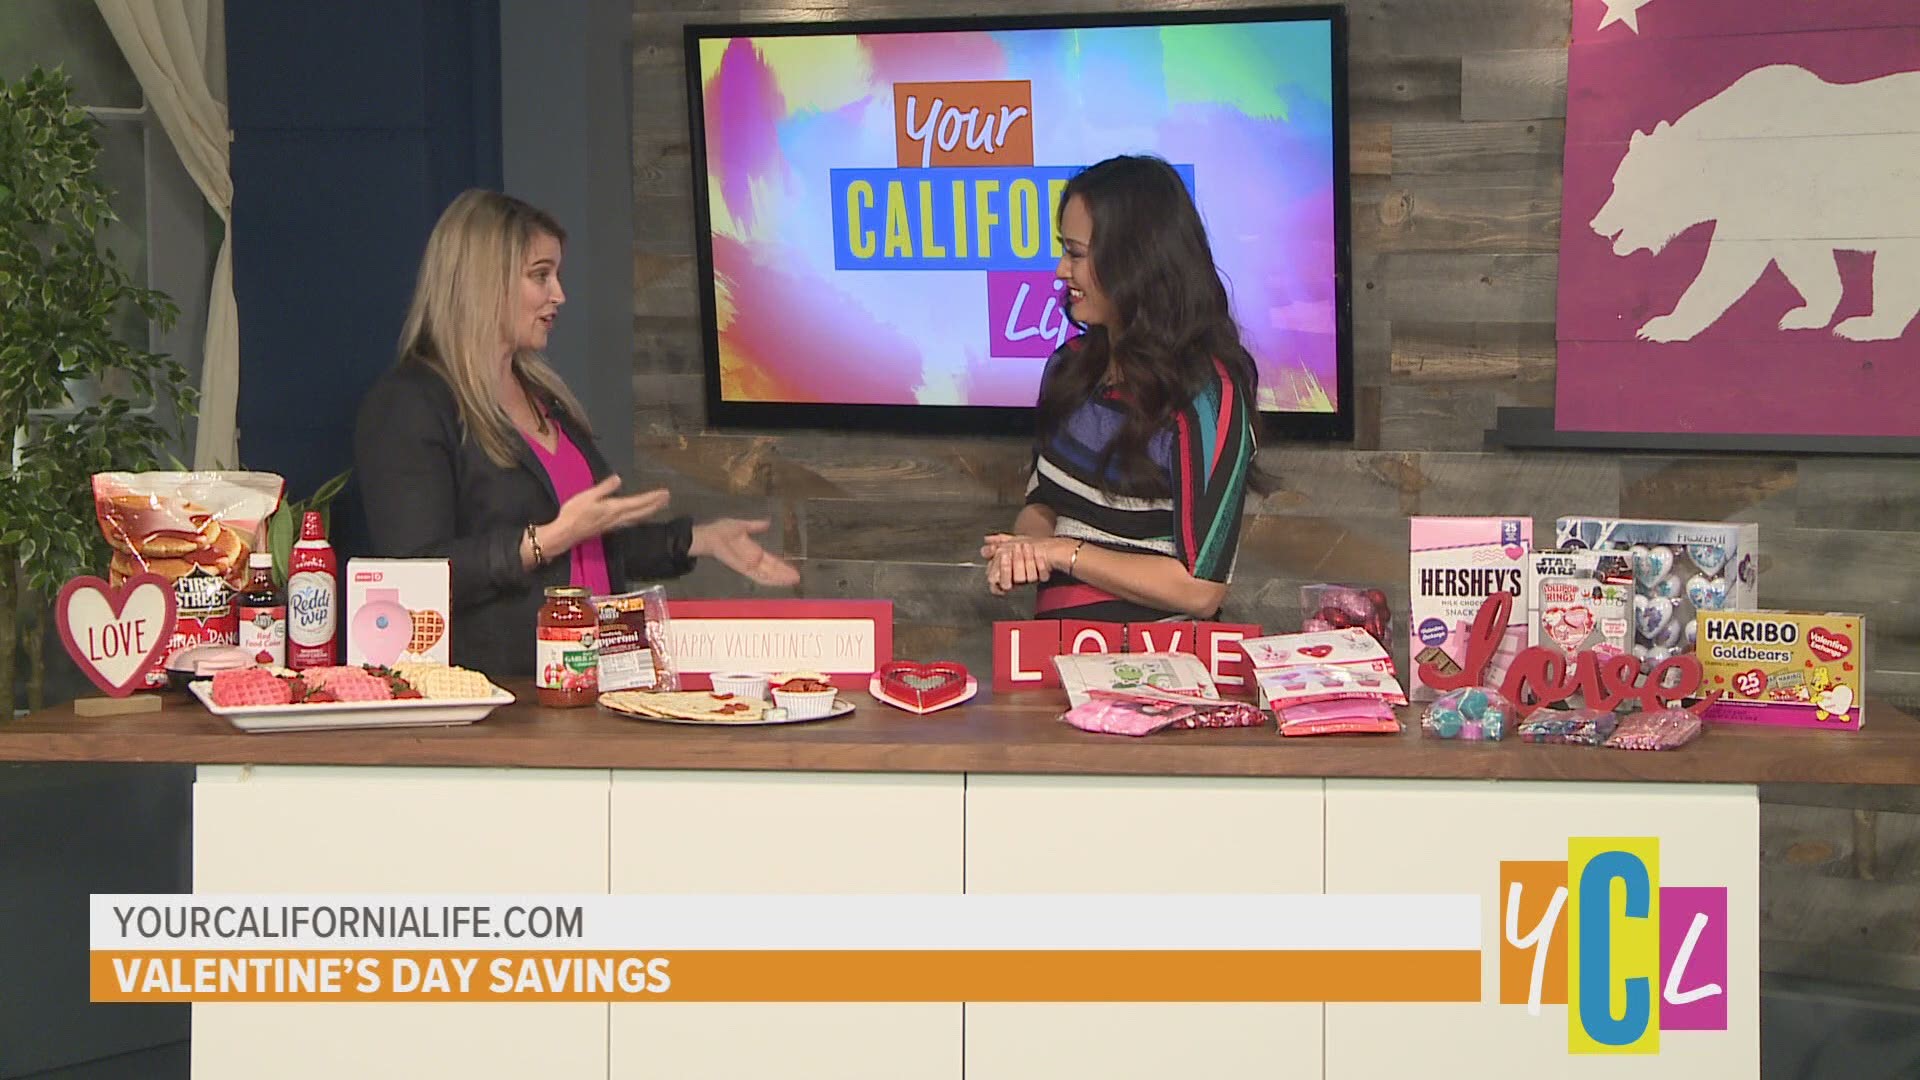 Diana Davis shows us how we can save money when shopping for our loved ones.